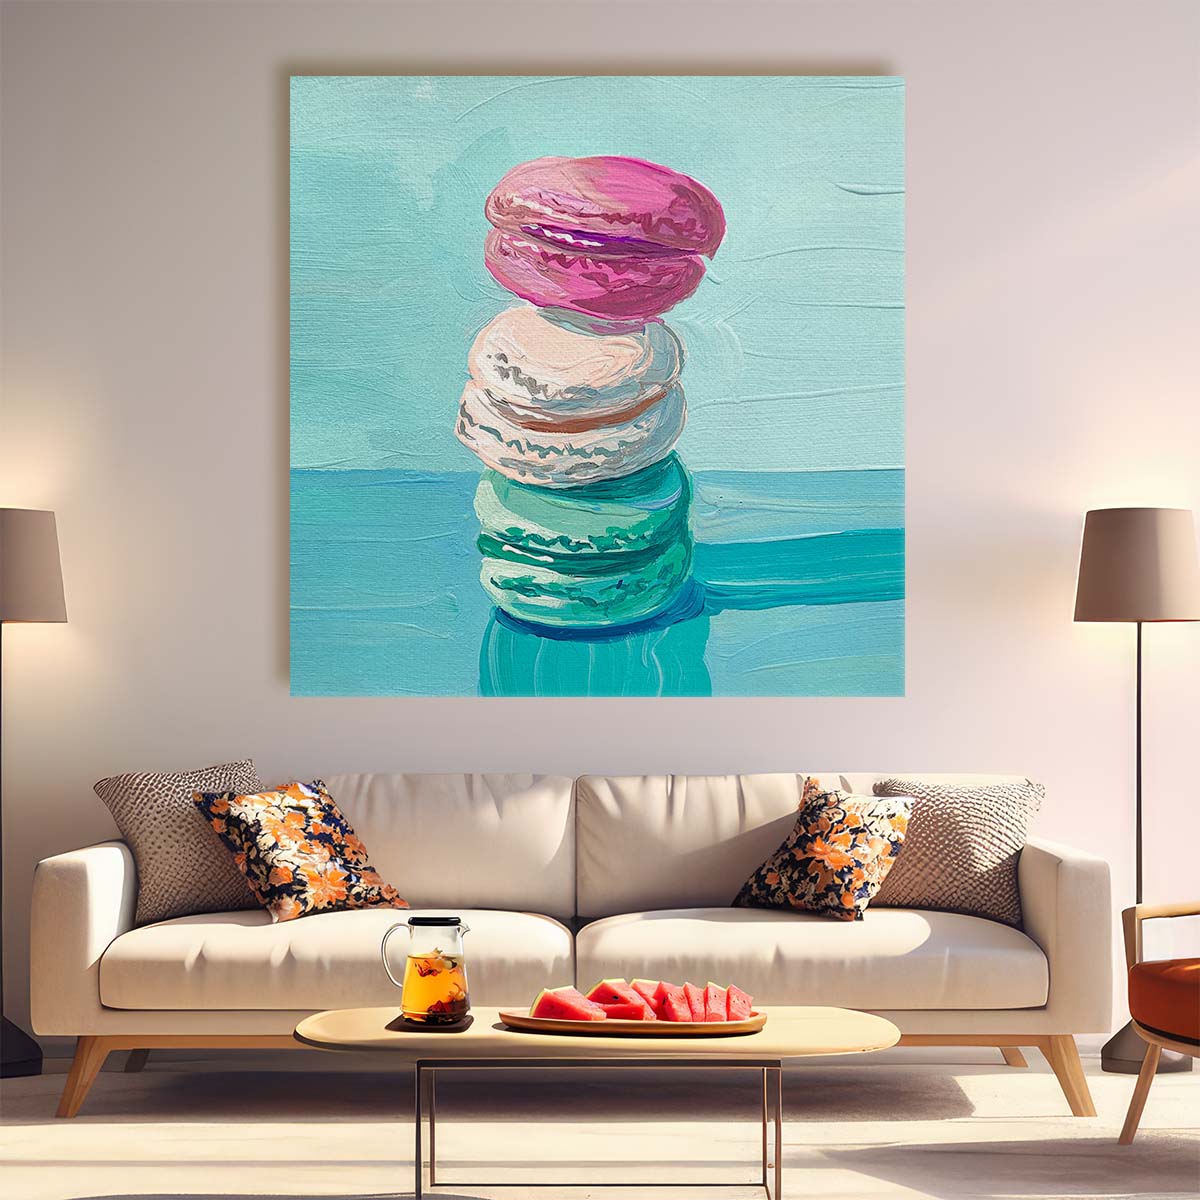 Vibrant Macaron Tower Dessert Illustration for Kitchen Wall Art by Luxuriance Designs. Made in USA.